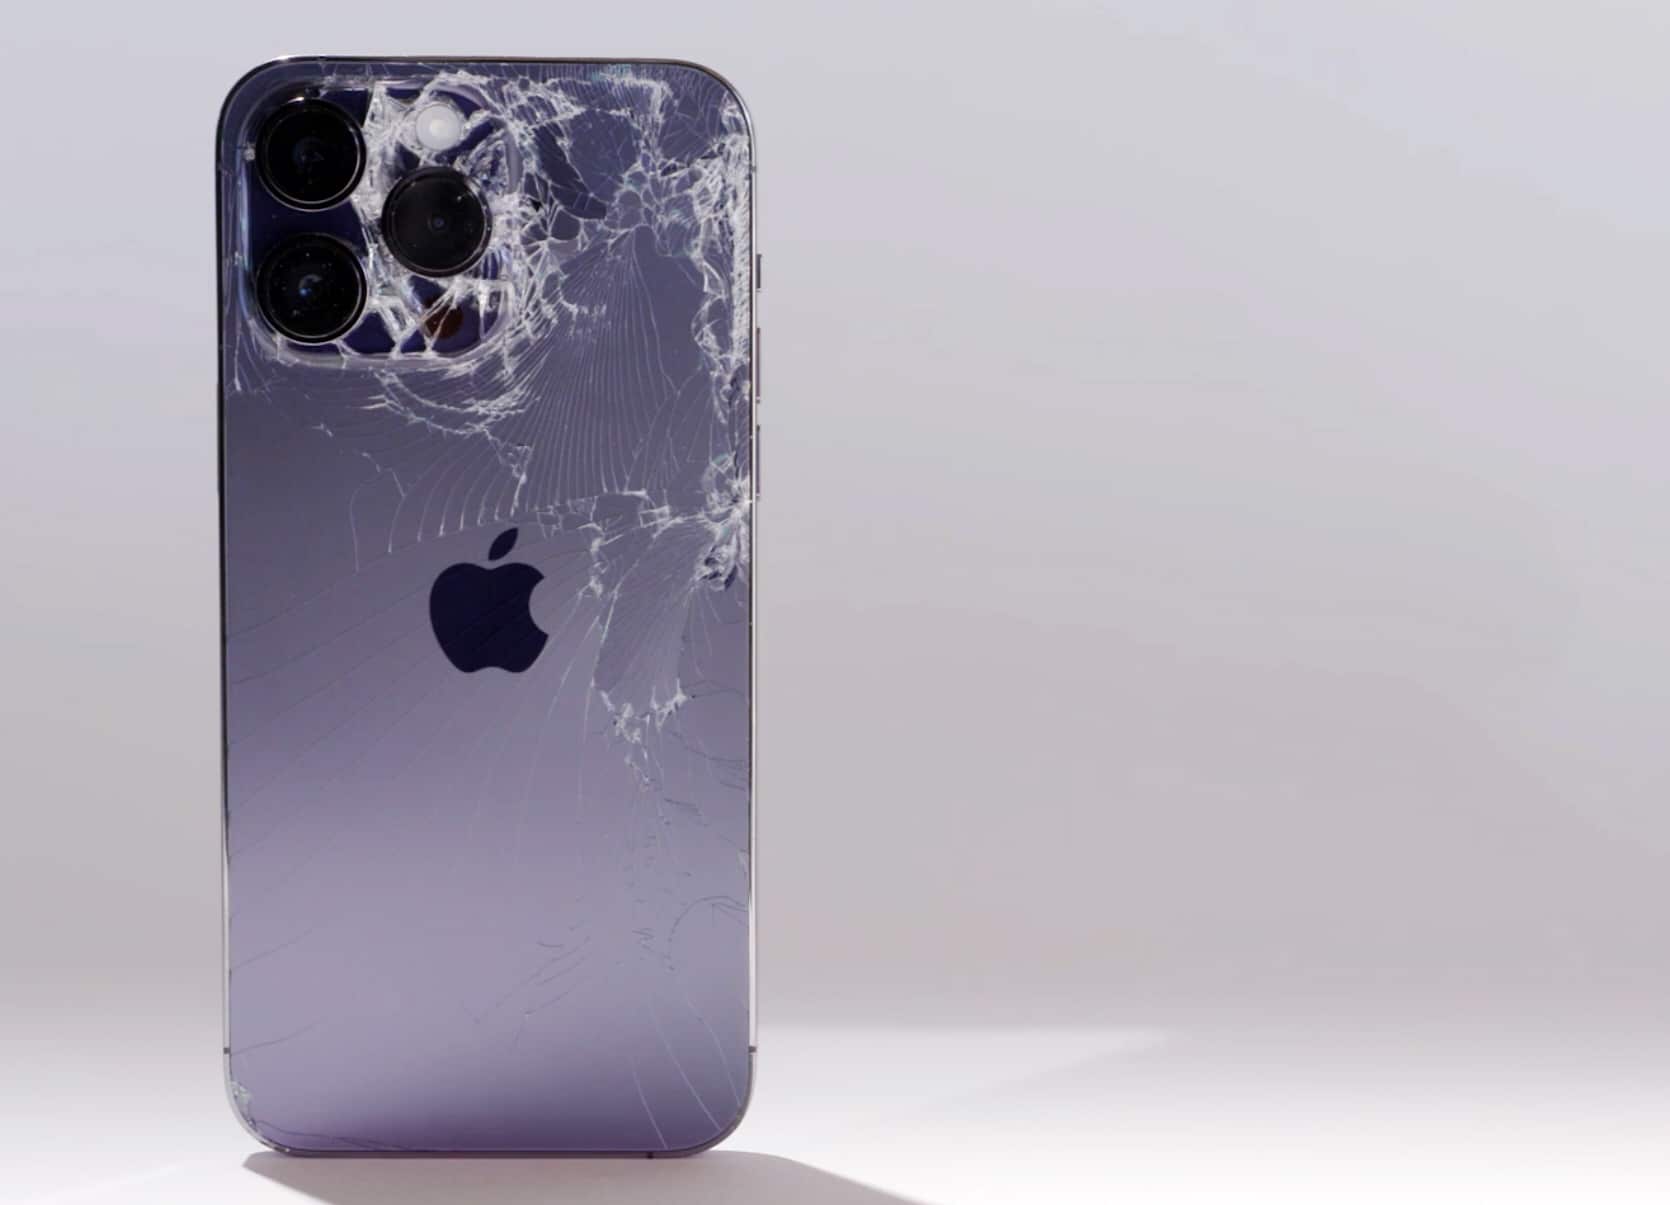 New Durability Tests Show Apple Iphone 14 Prone To Significant Damage When Dropped